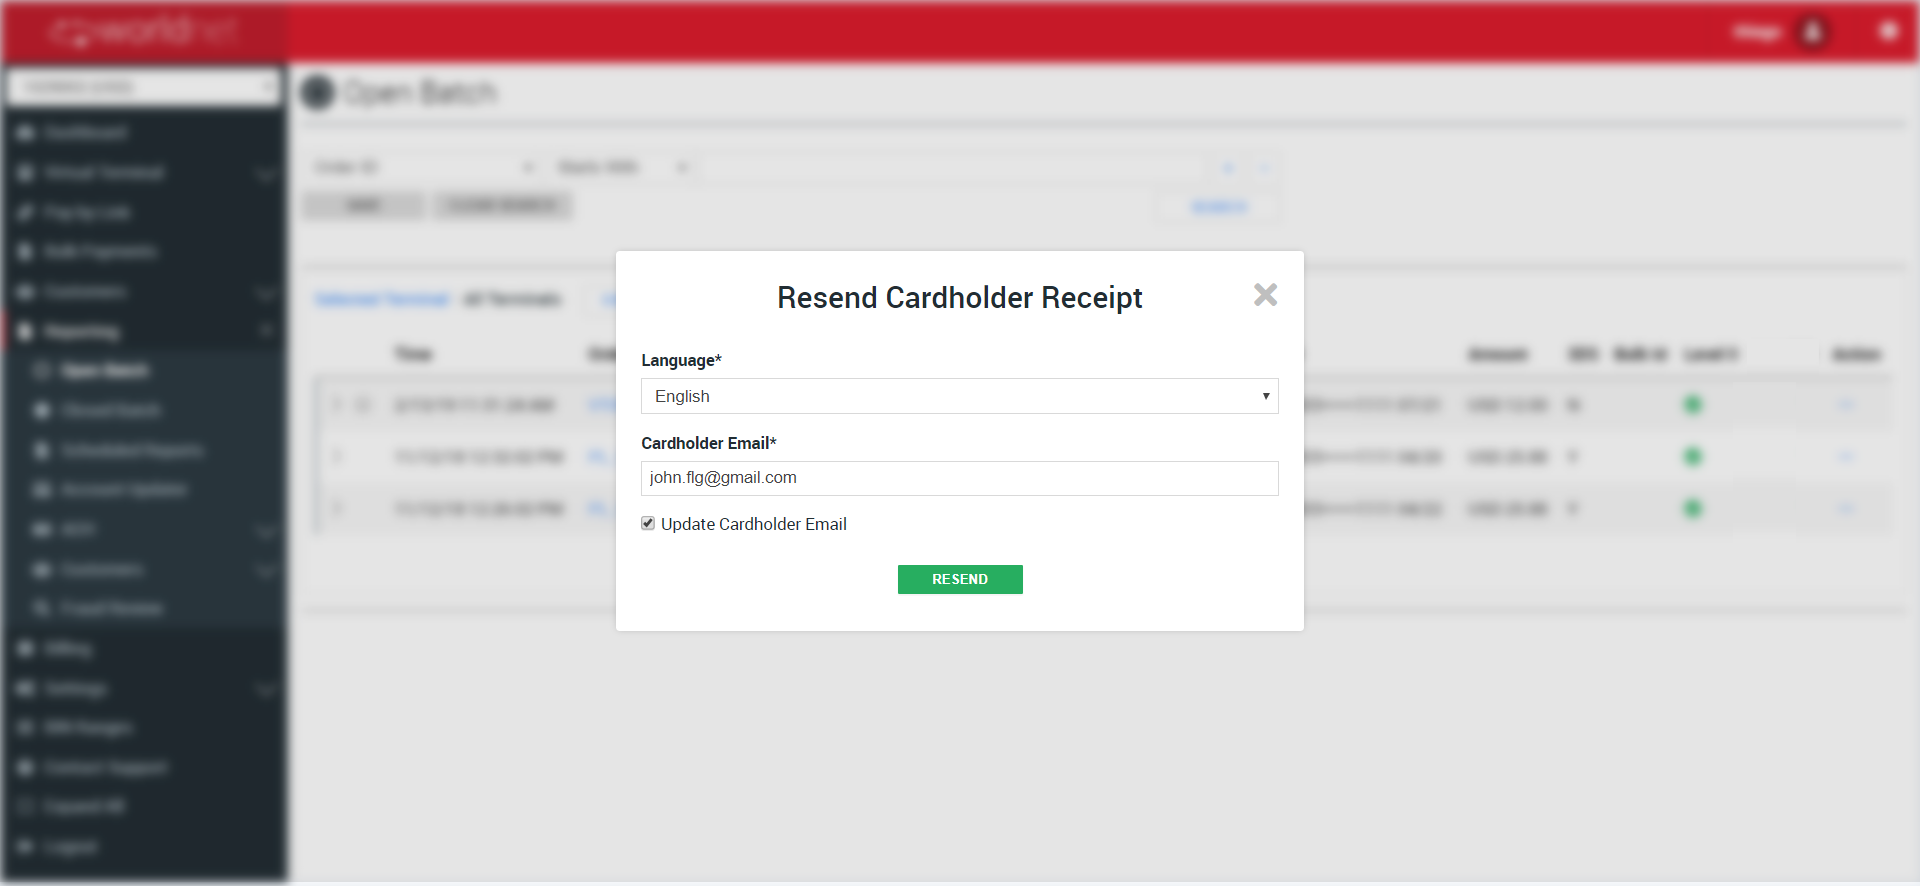 merchant:existing_merchant:selfcare_system:reporting:selfcare-openbatch-actions-resend_cardholder_receipt.png